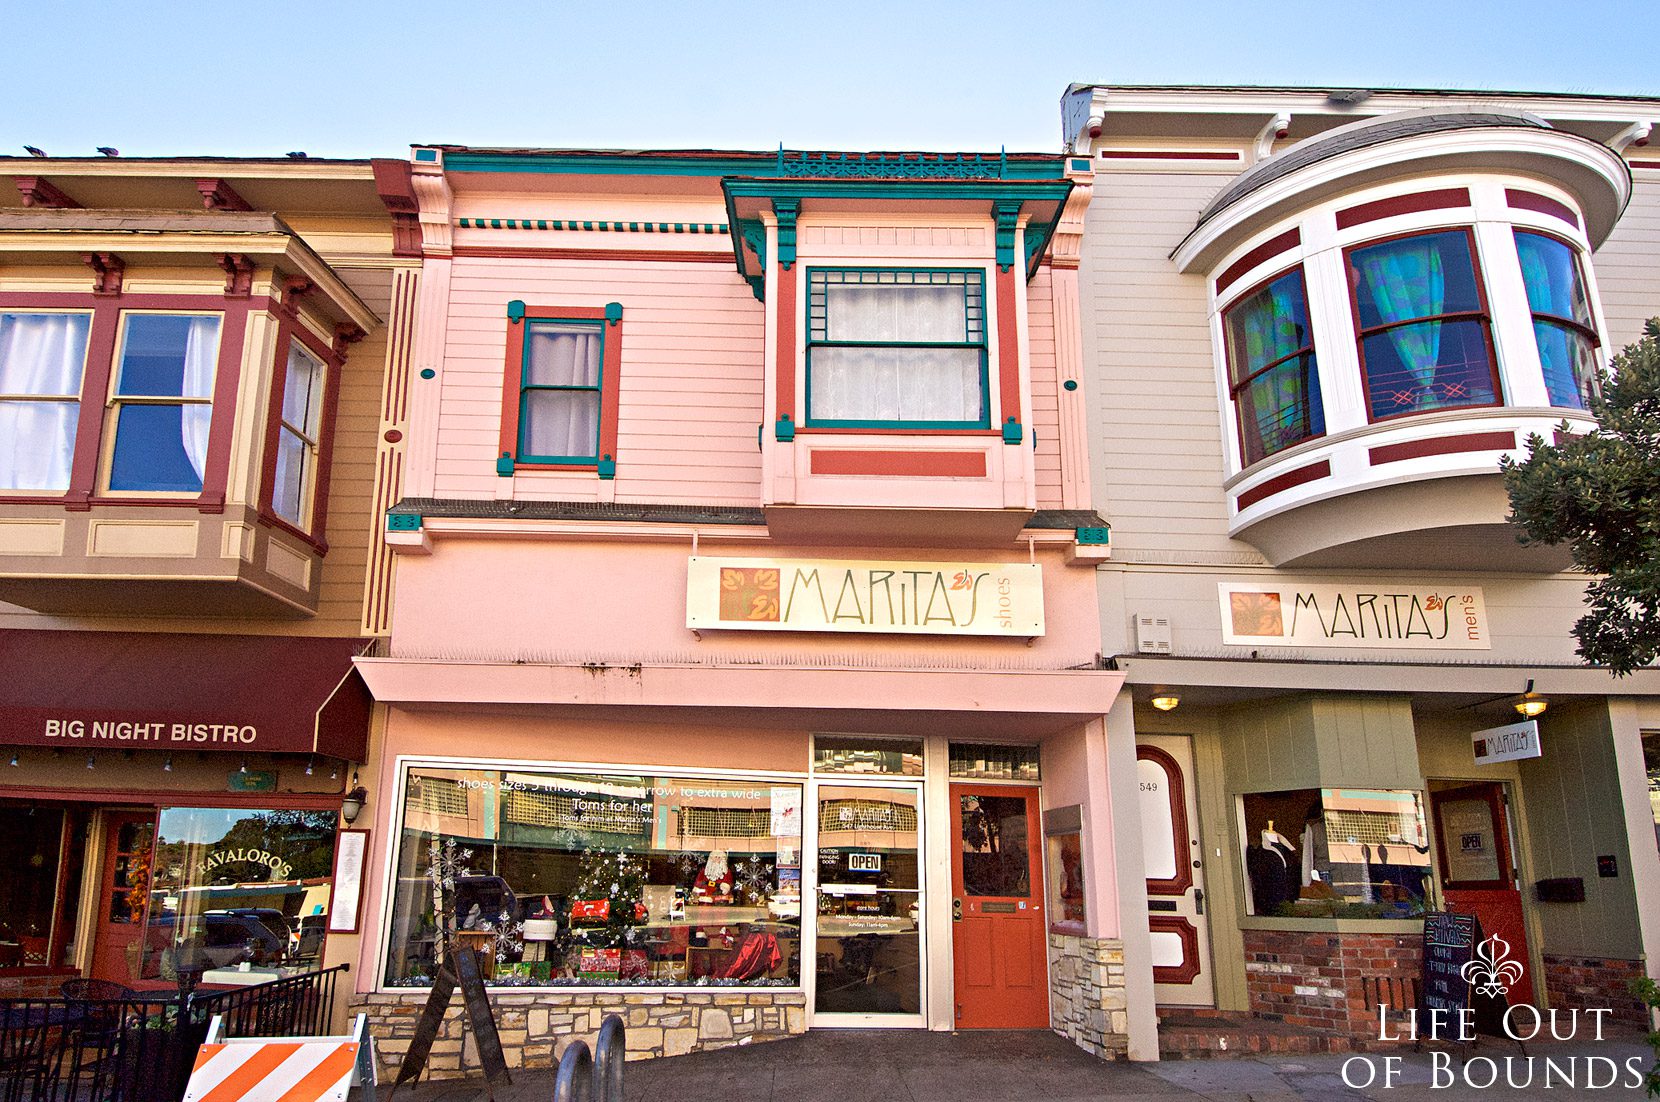 Colorful-Victorian-buildings-in-downtown-Pacific-Grove-California